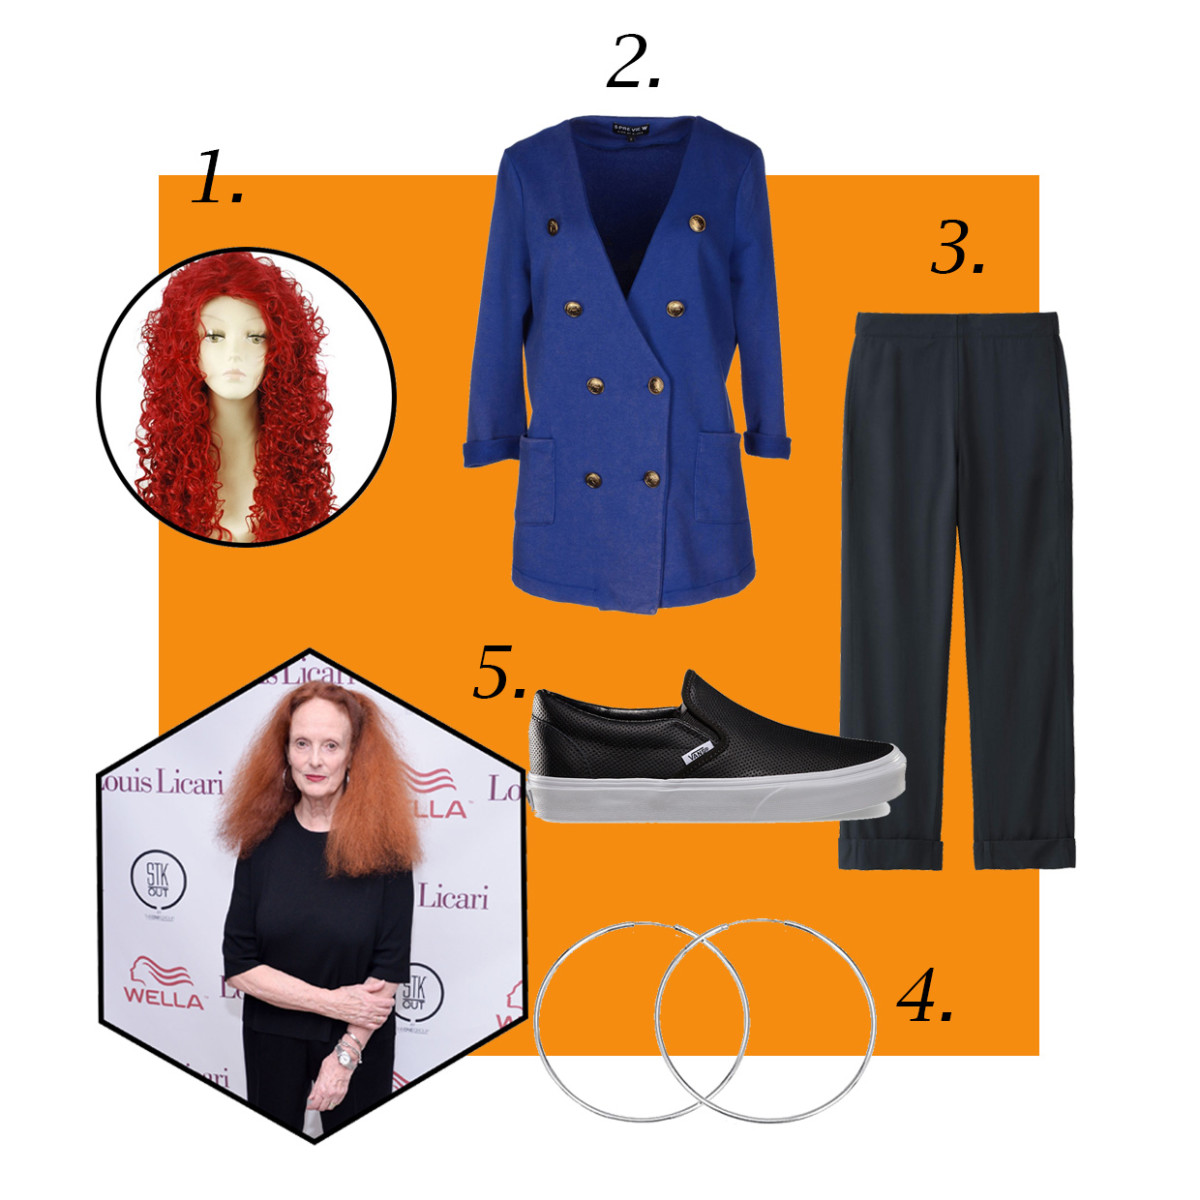 1. Nouqi party wig, $33.24, available at Amazon; 2. 5Preview blazer, $53, available at Yoox; 3. Lemaire rayon wide-leg pants, $49.90, available at Uniqlo; 4. Silver hoop earrings, $2, available at Florence Scovel; 5. Vans pert leather slip-on, $60, available at Vans. Photo: Grant Lamos IV/Getty Images